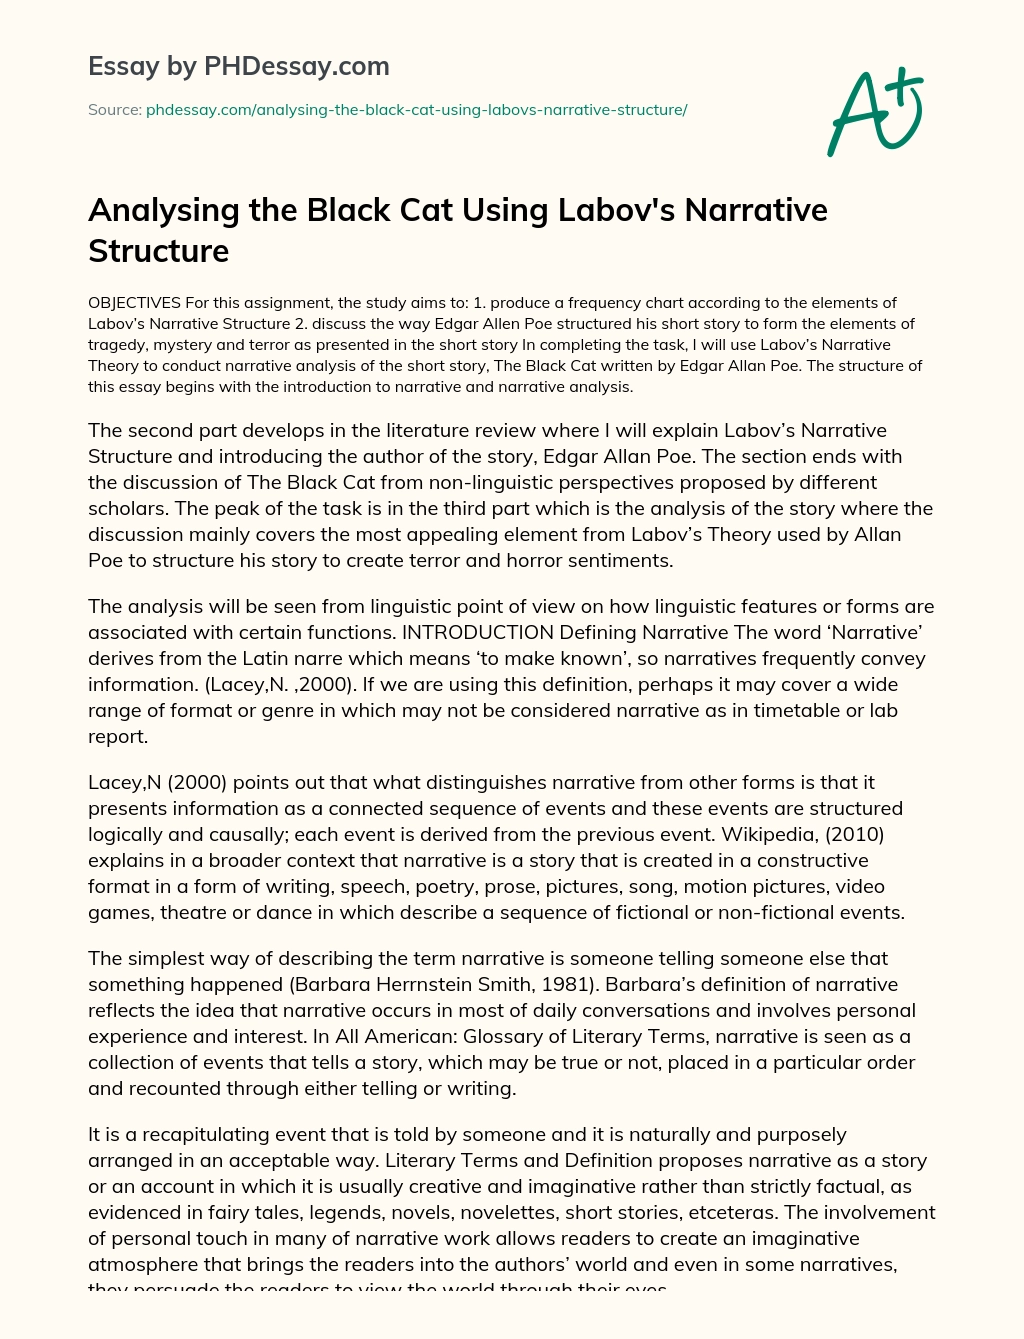 Analysing the Black Cat Using Labov’s Narrative Structure essay